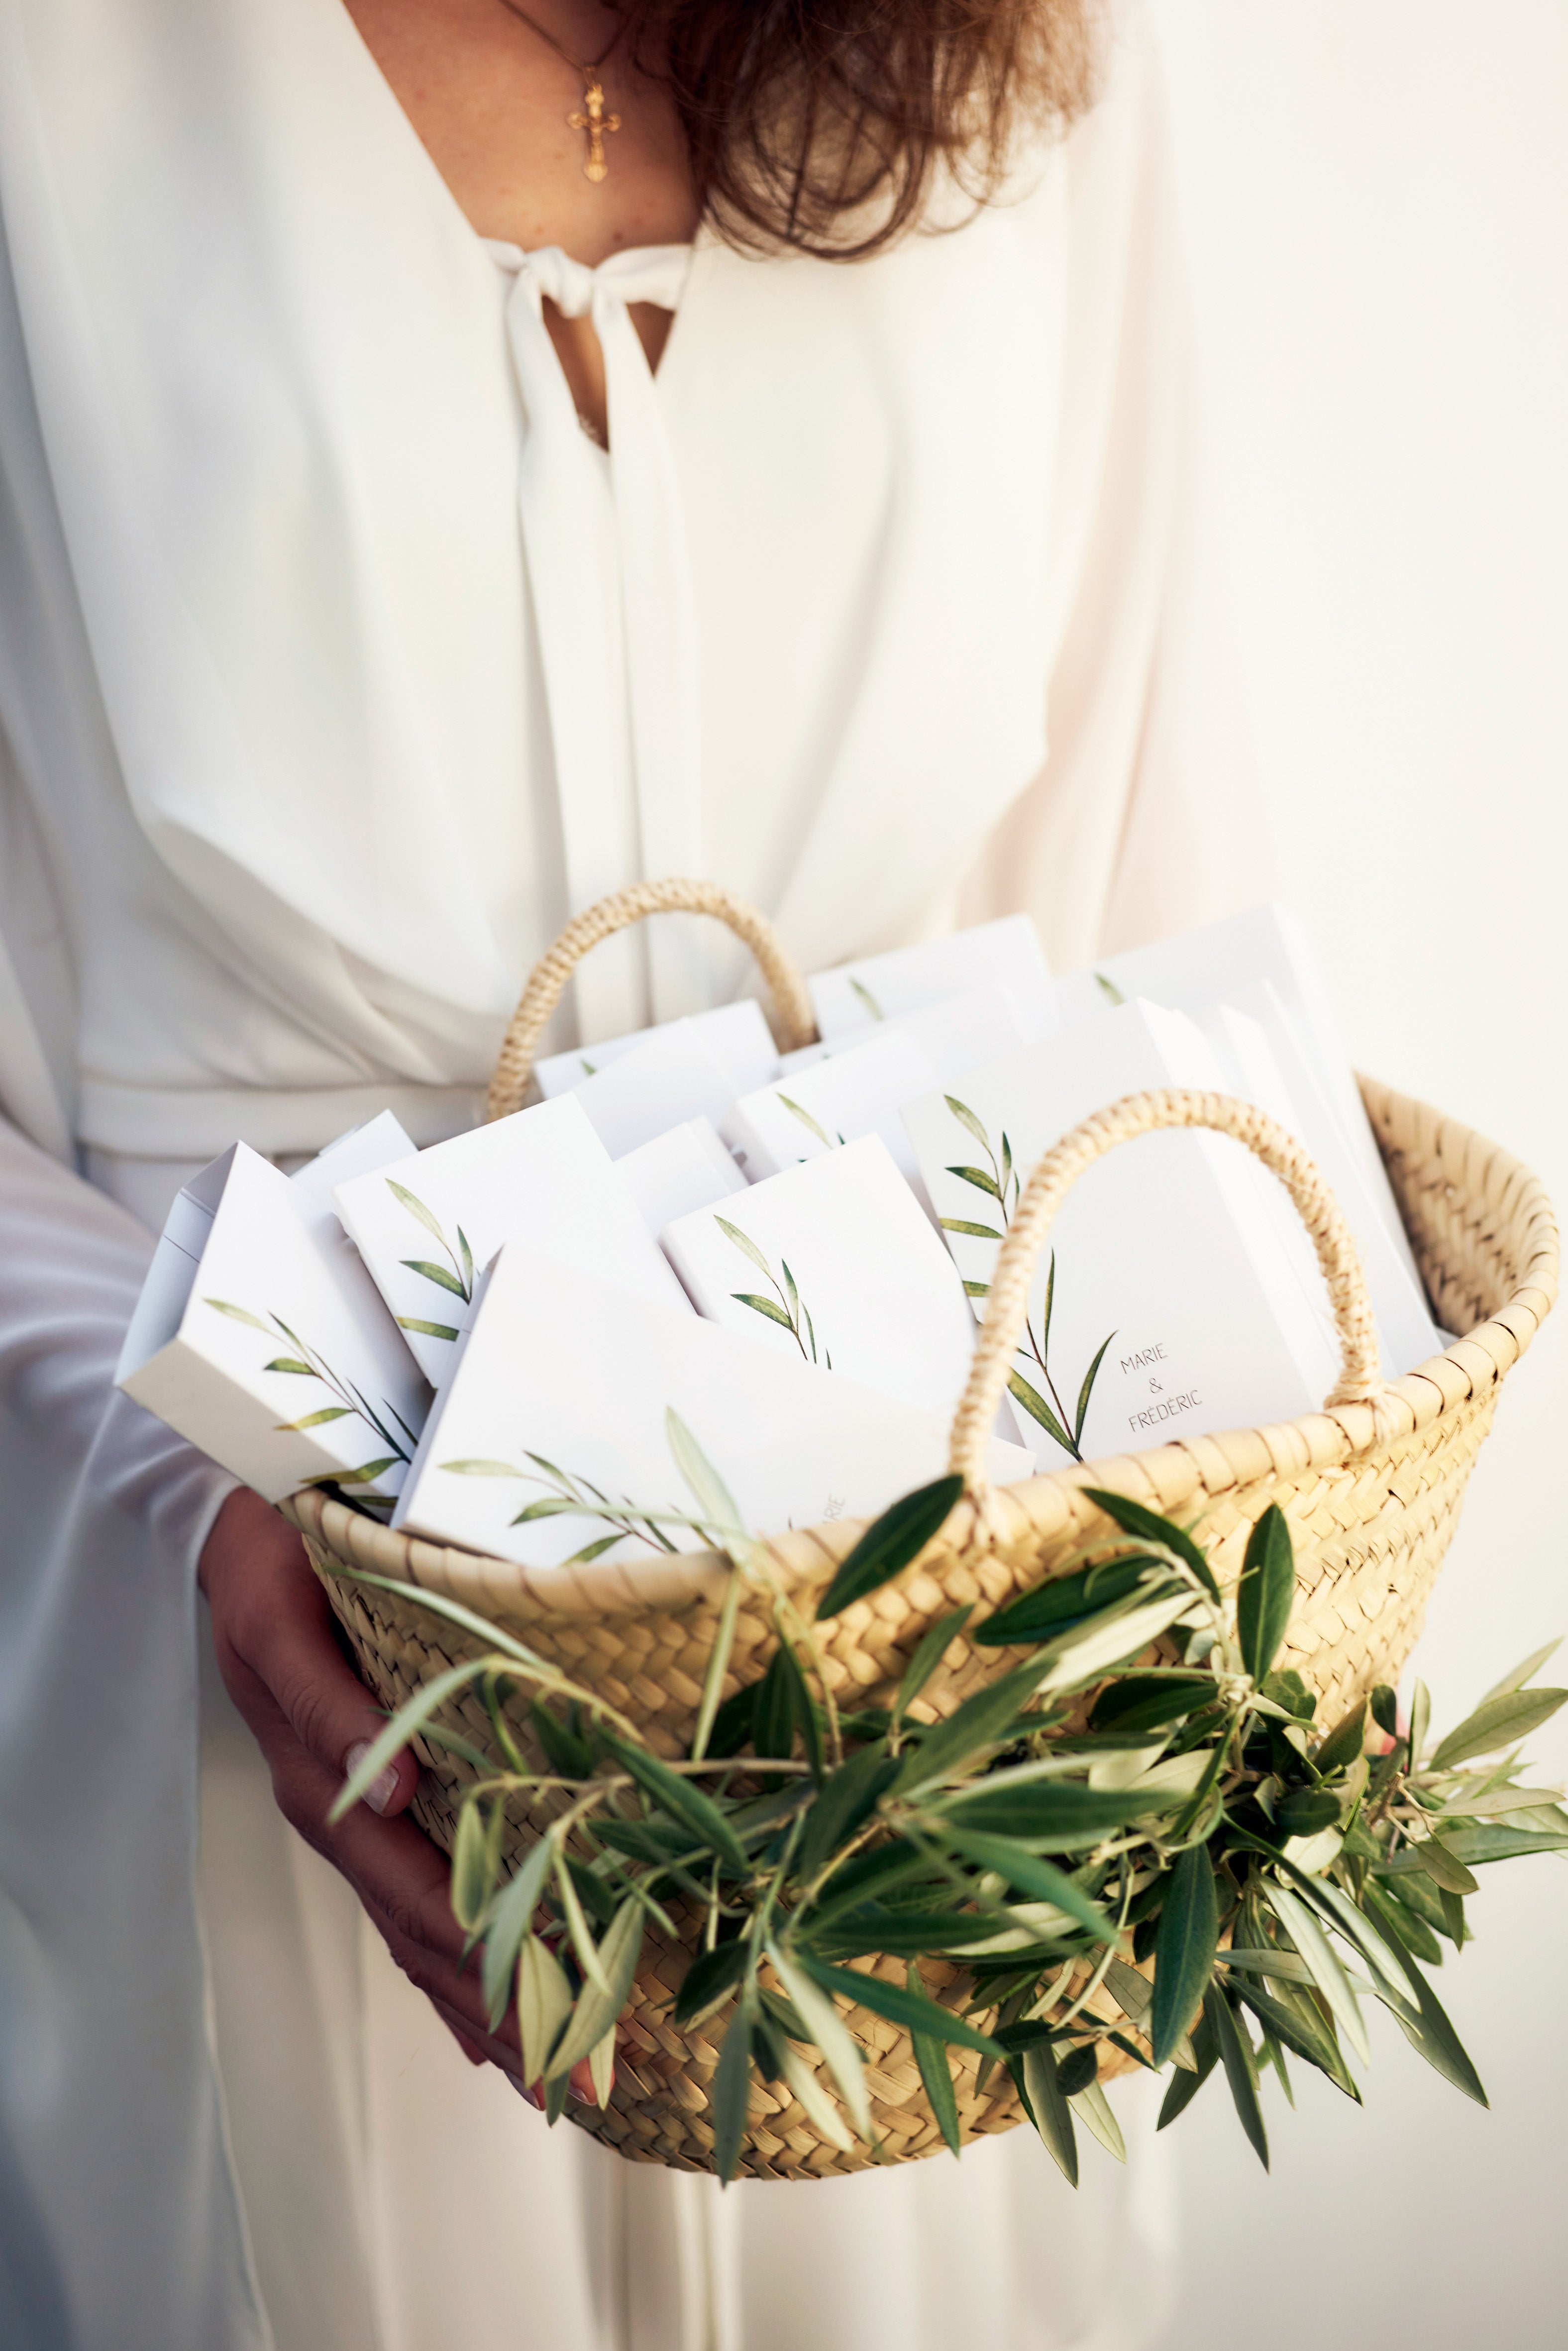 Wedding favours with refinement and elegance